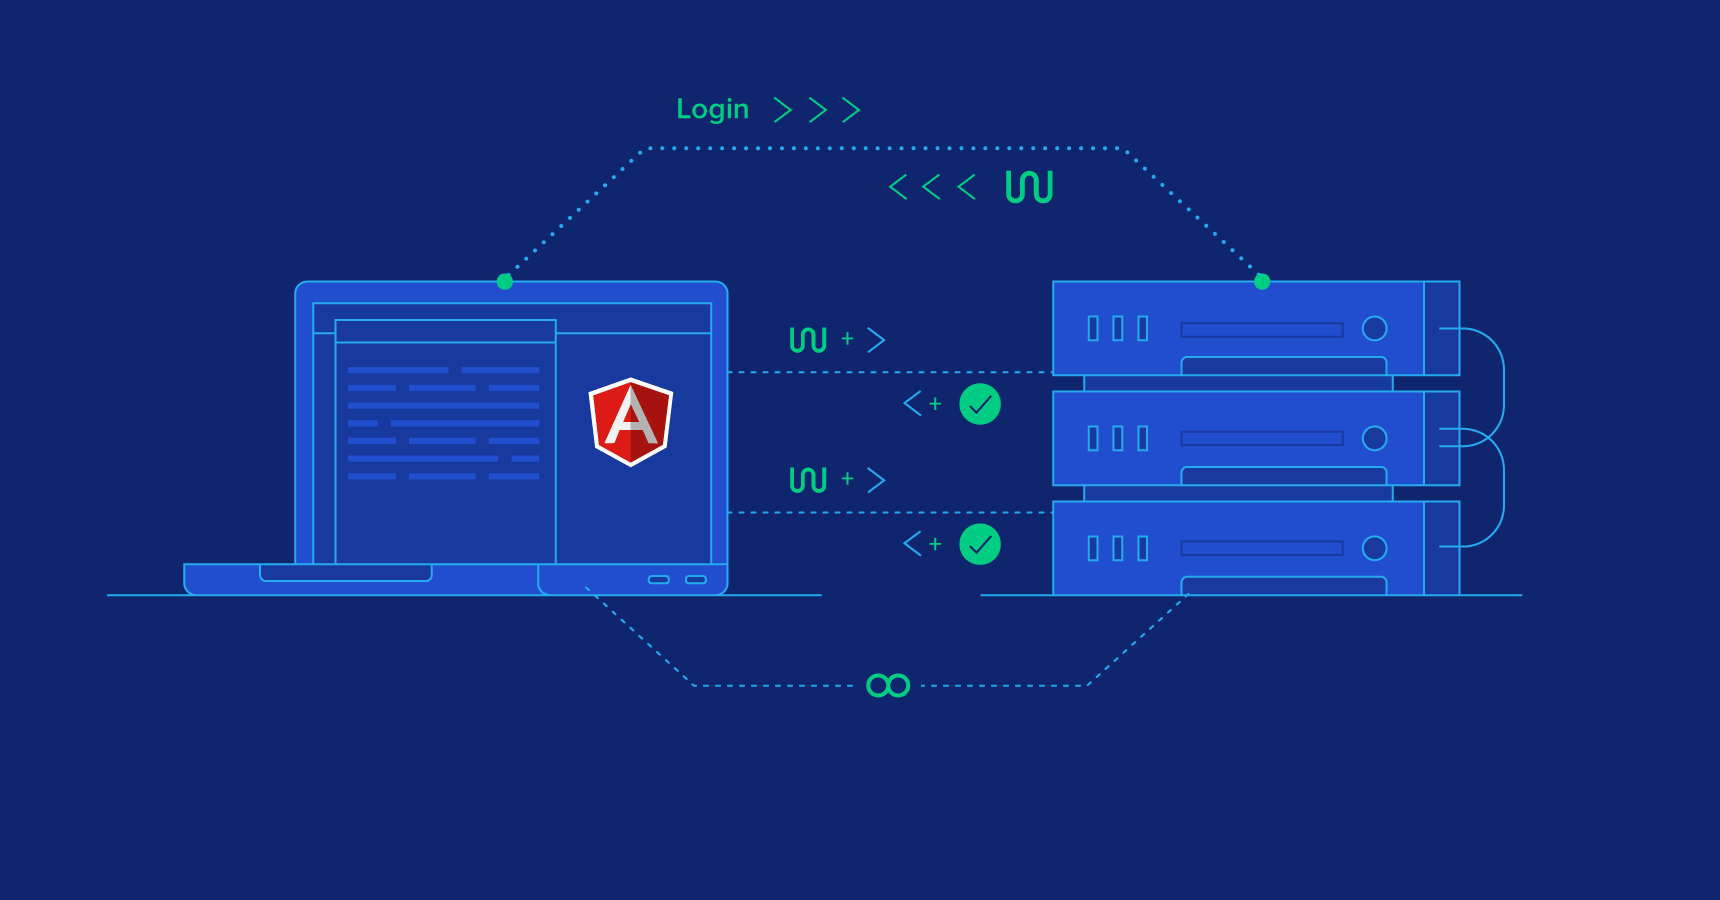 How to Do JWT Authentication With an Angular 6 SPA